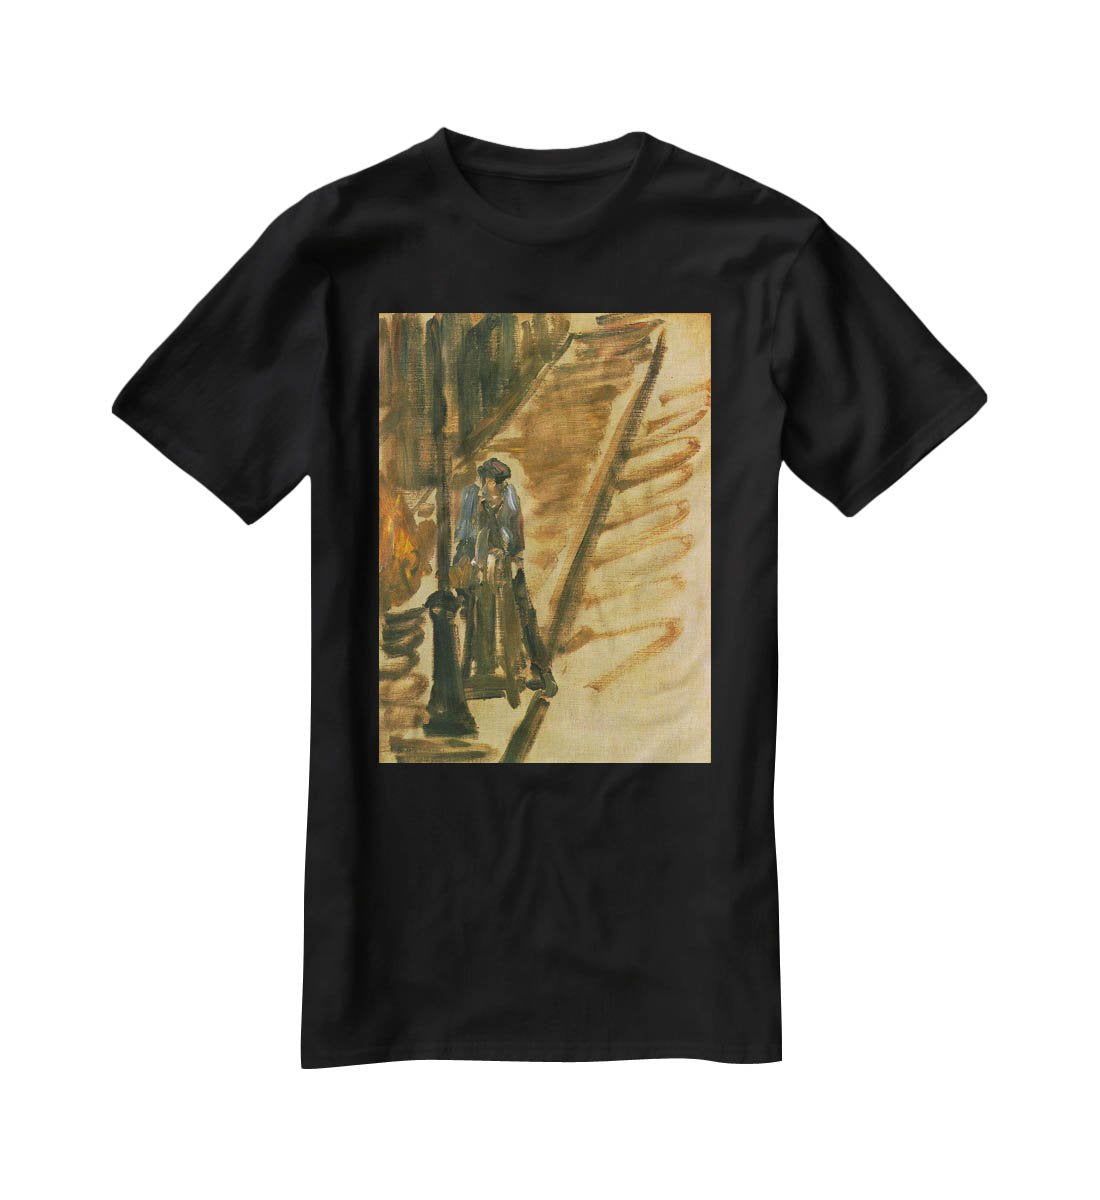 Rue Mossnier with Knife Grinder by Manet T-Shirt - Canvas Art Rocks - 1